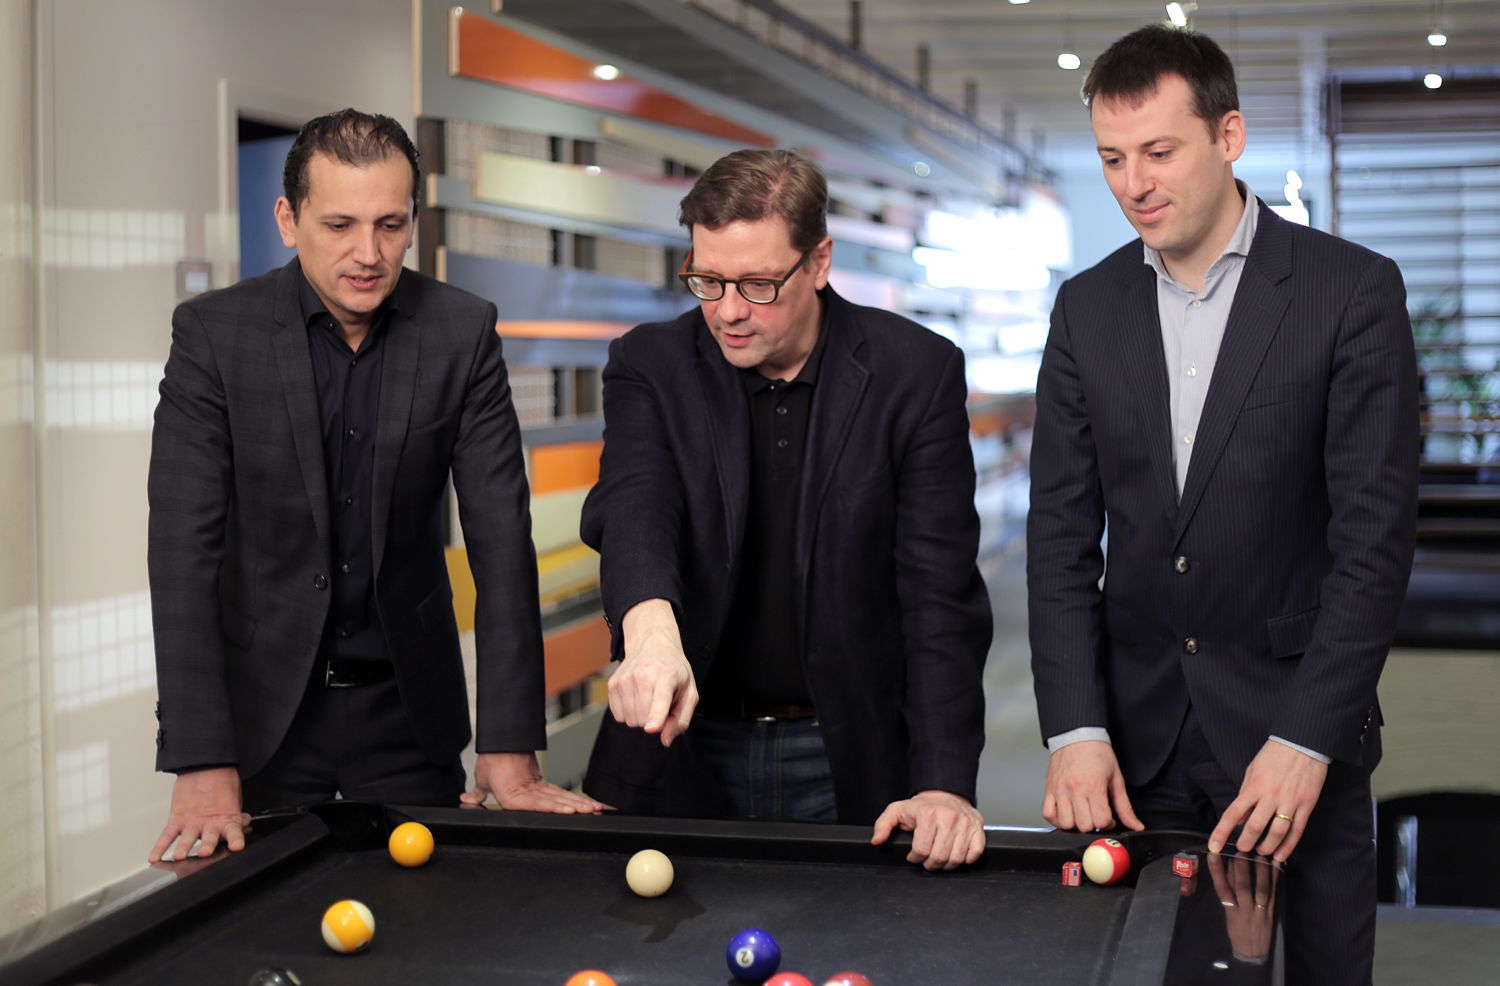 Joint CEO's Karim Chouikri and Brice Le Blevennec and CFO Frédéric Desonnay